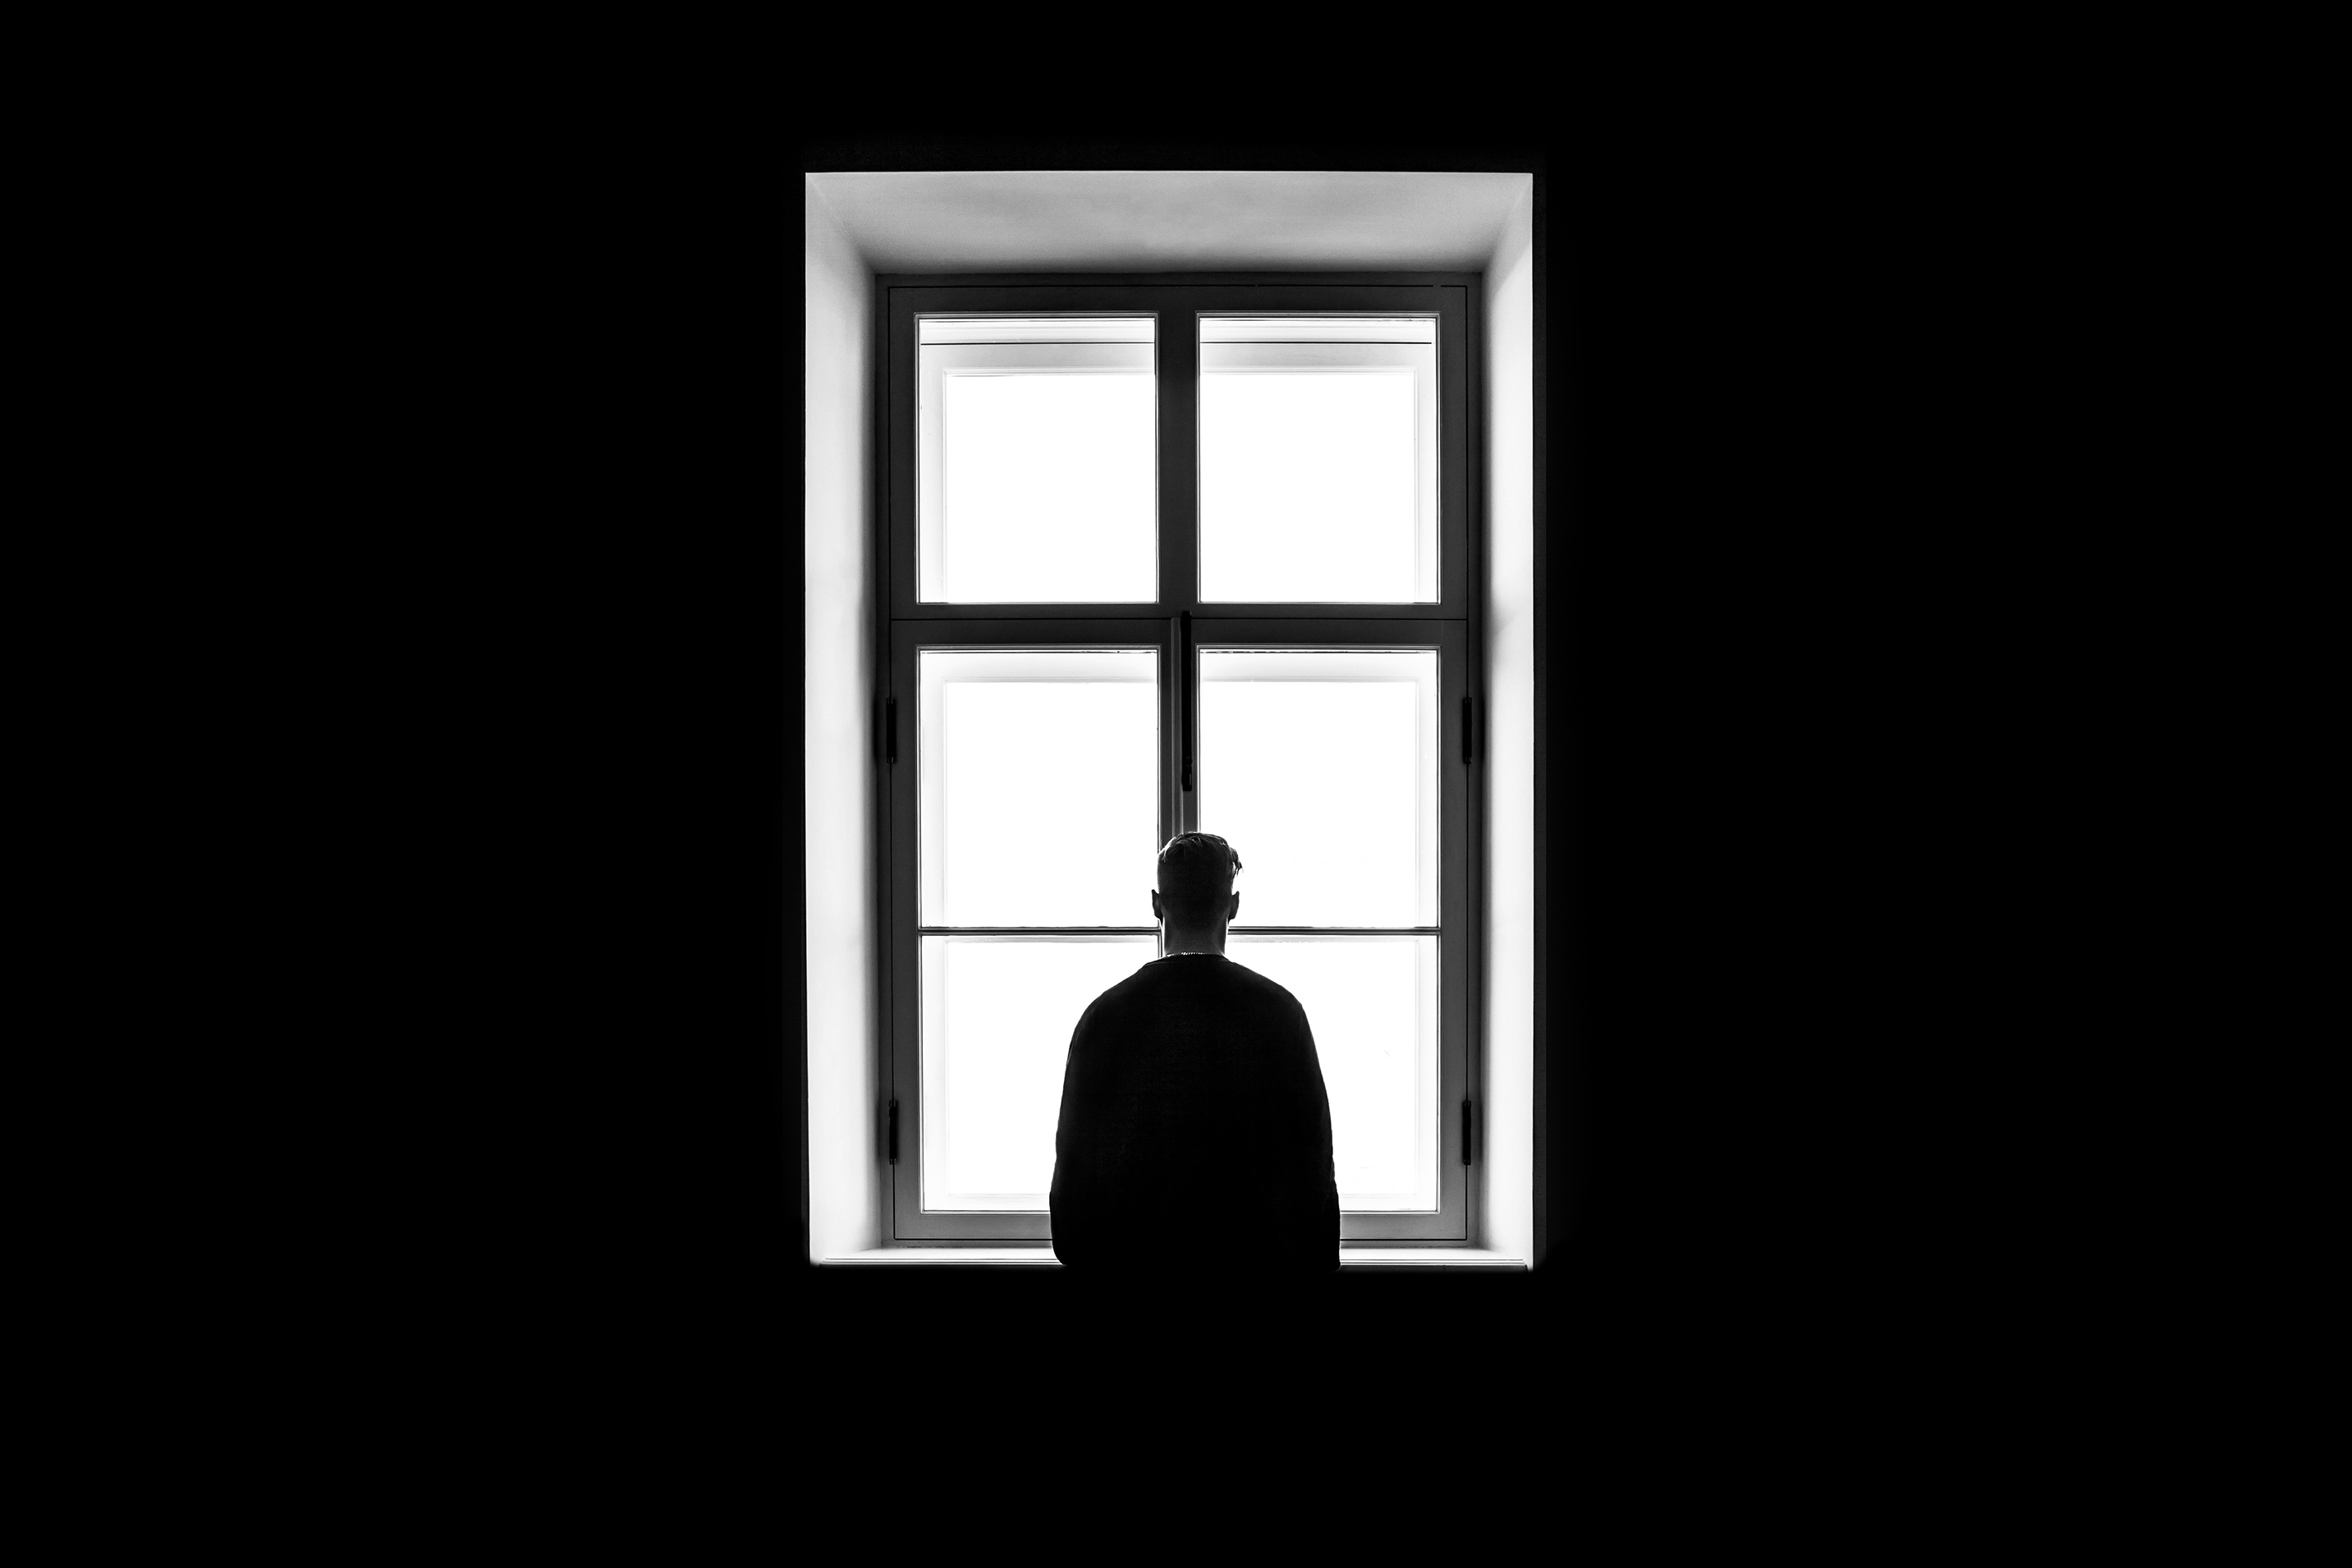 A man staring out the window while deep in thought | Source: Shutterstock